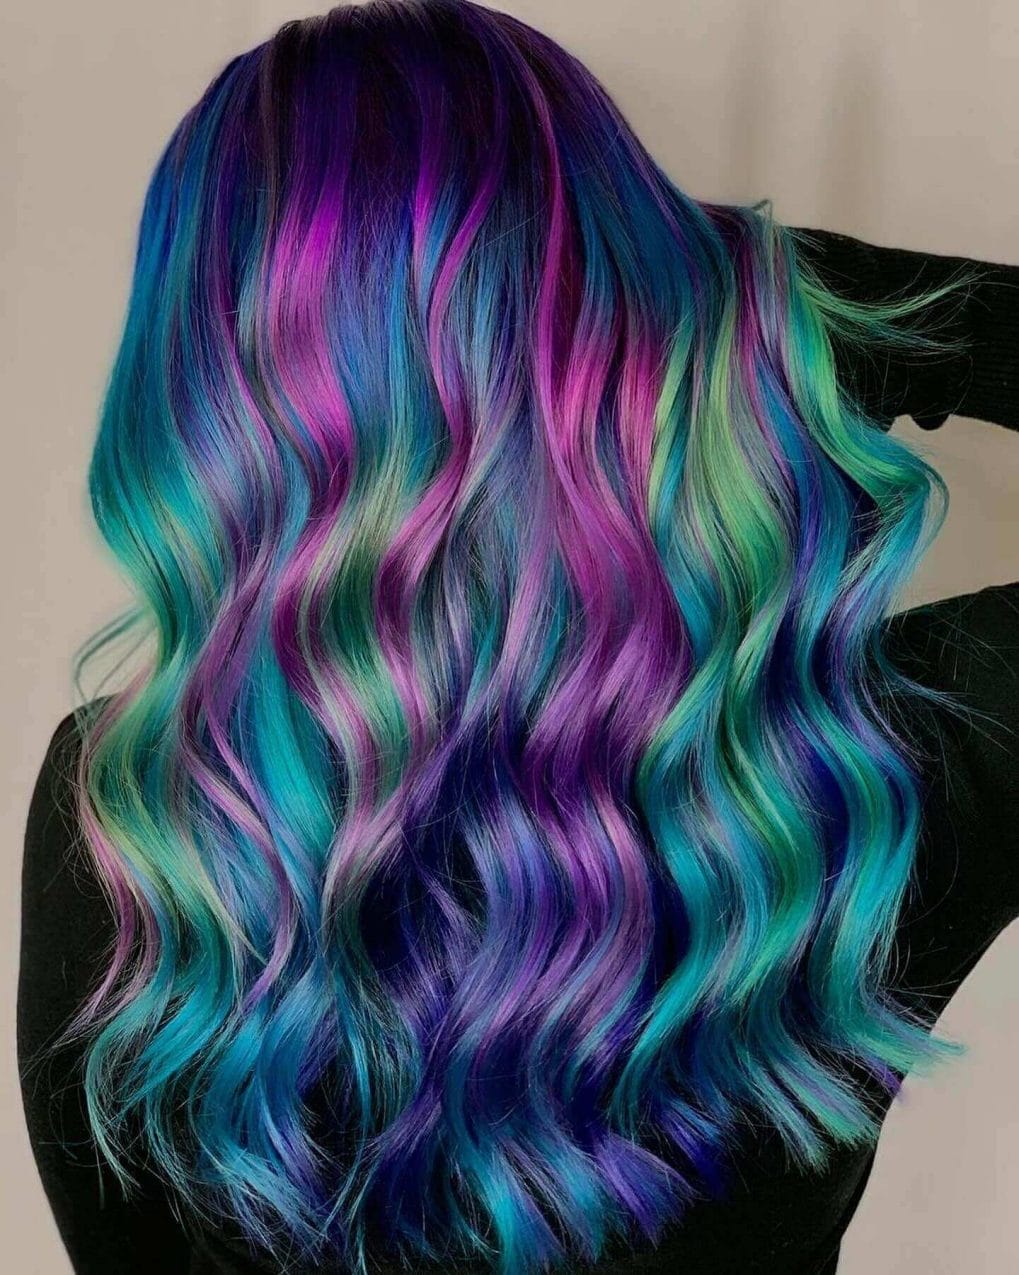 Ocean-inspired hairstyle with deep purple to sea green waves